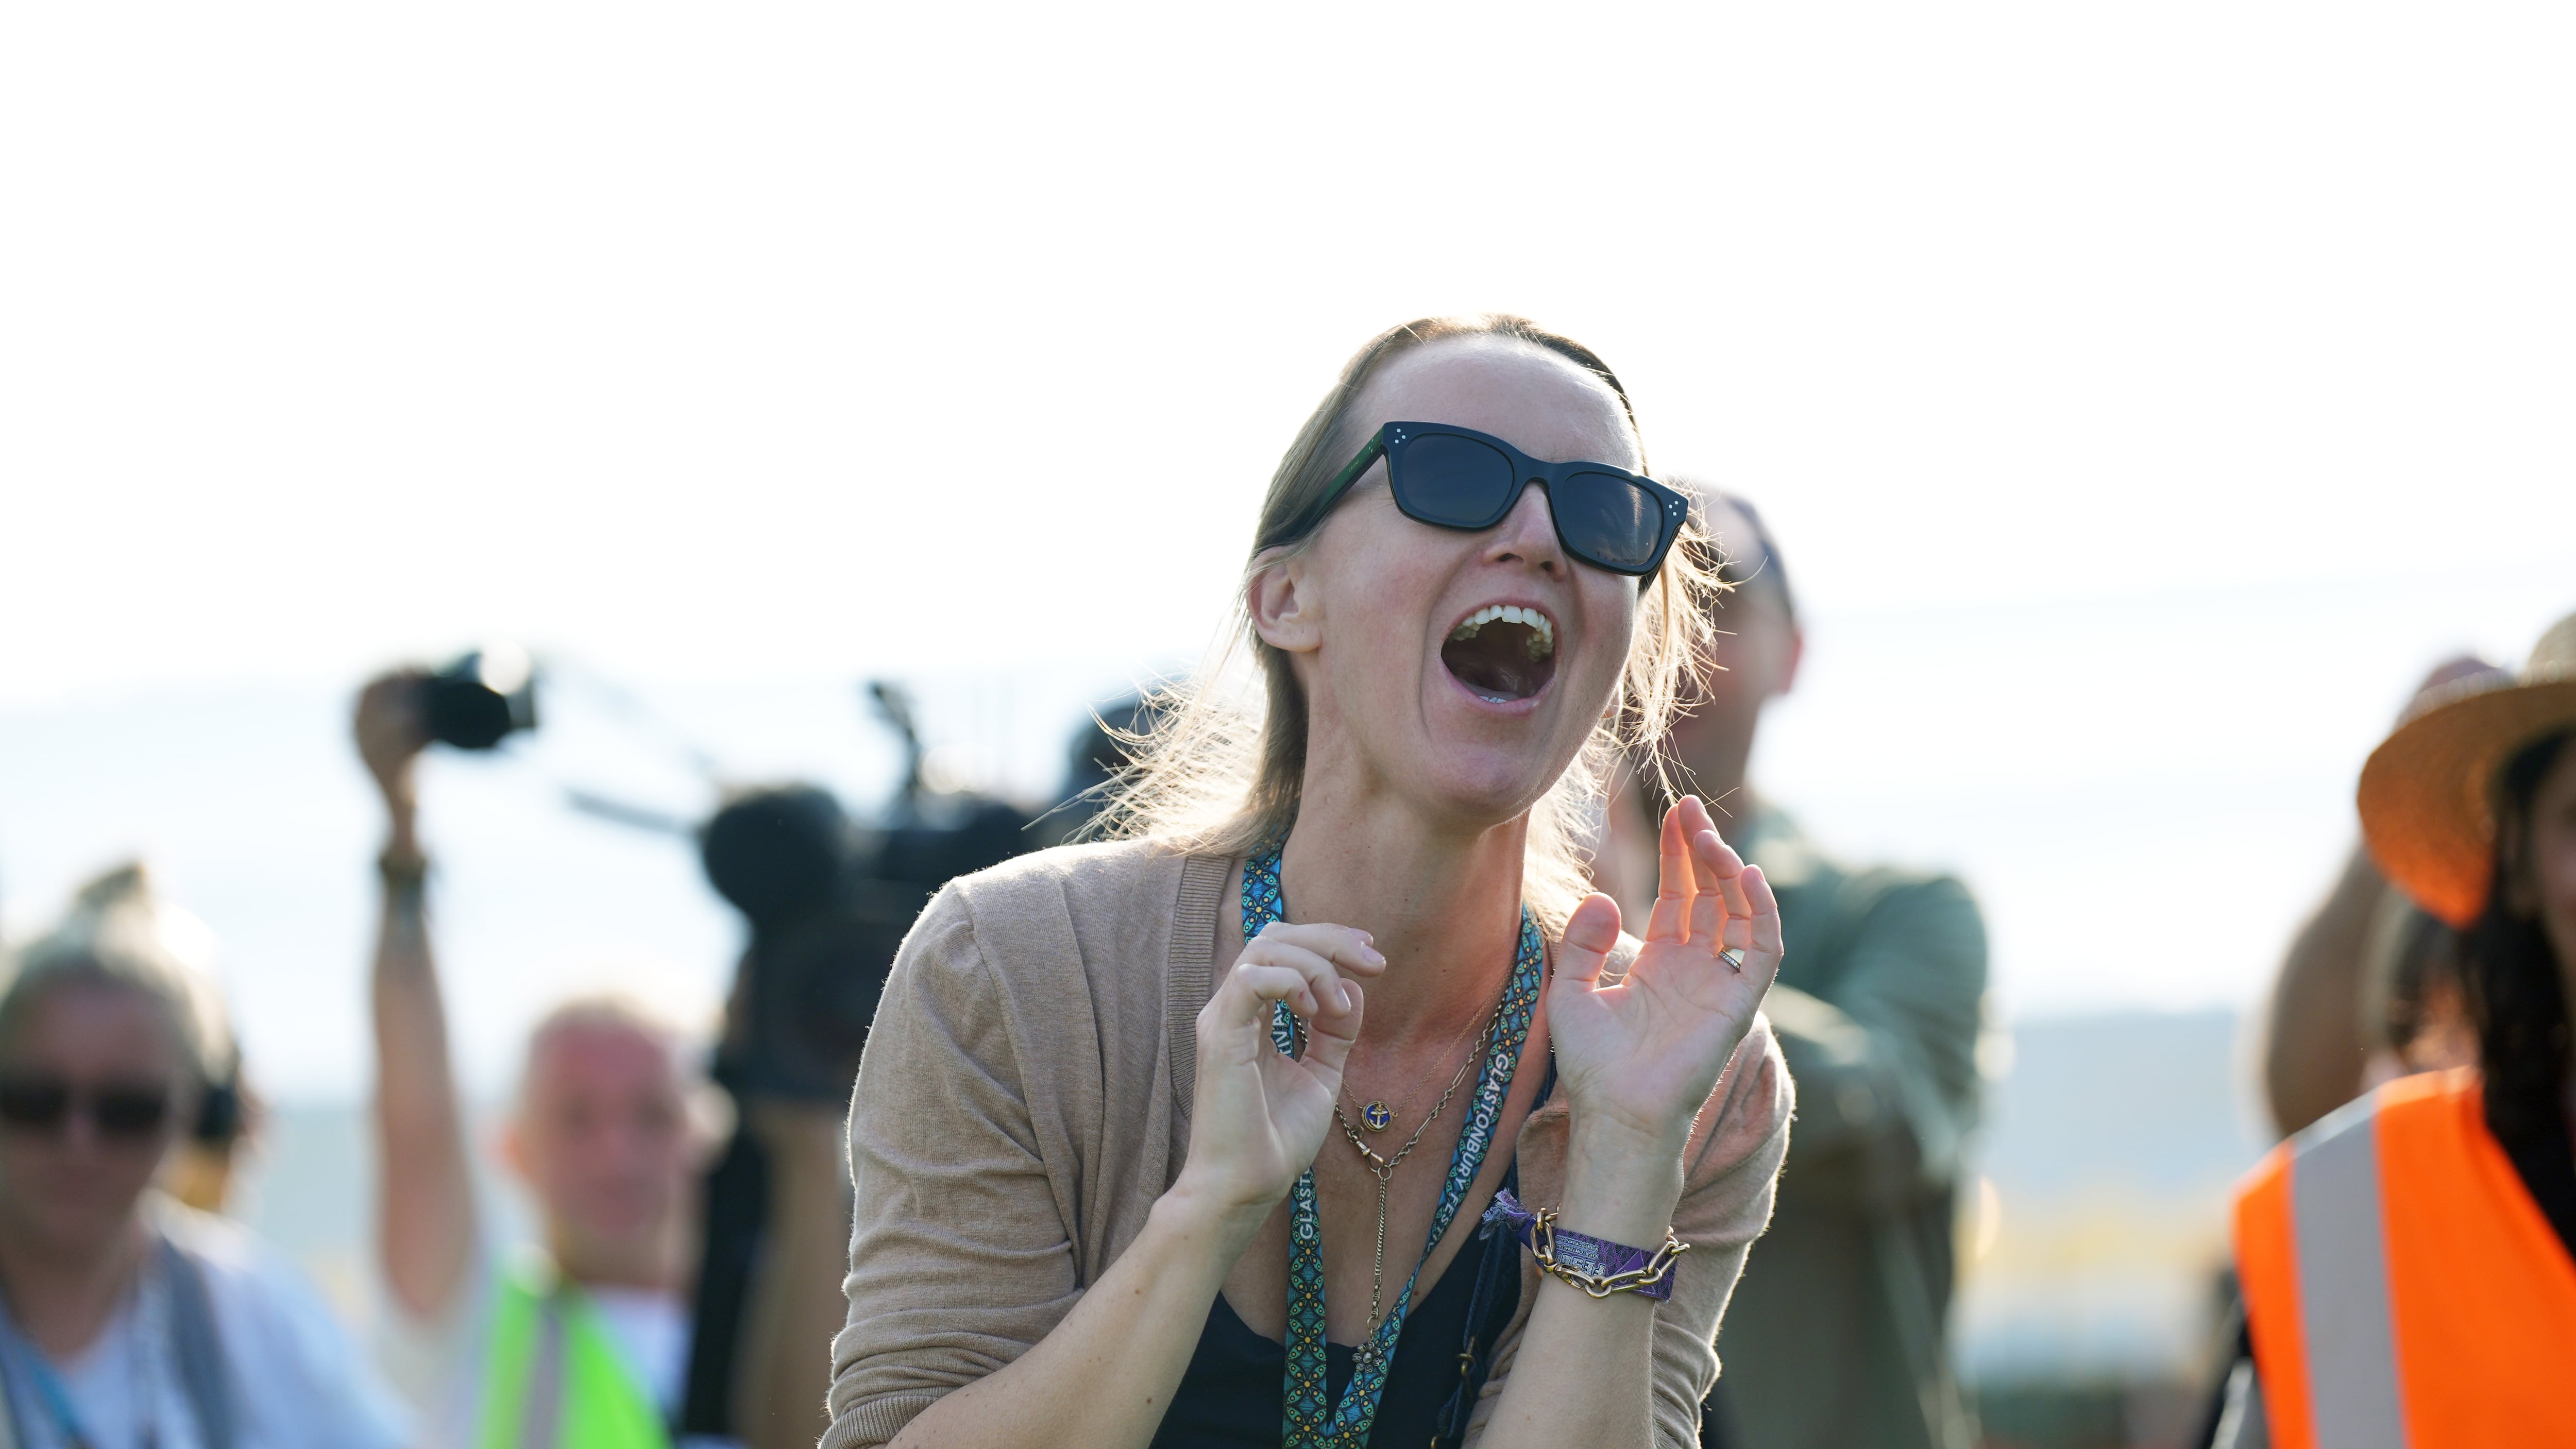 Emily Eavis opens the gates on the first day of the Glastonbury Festival